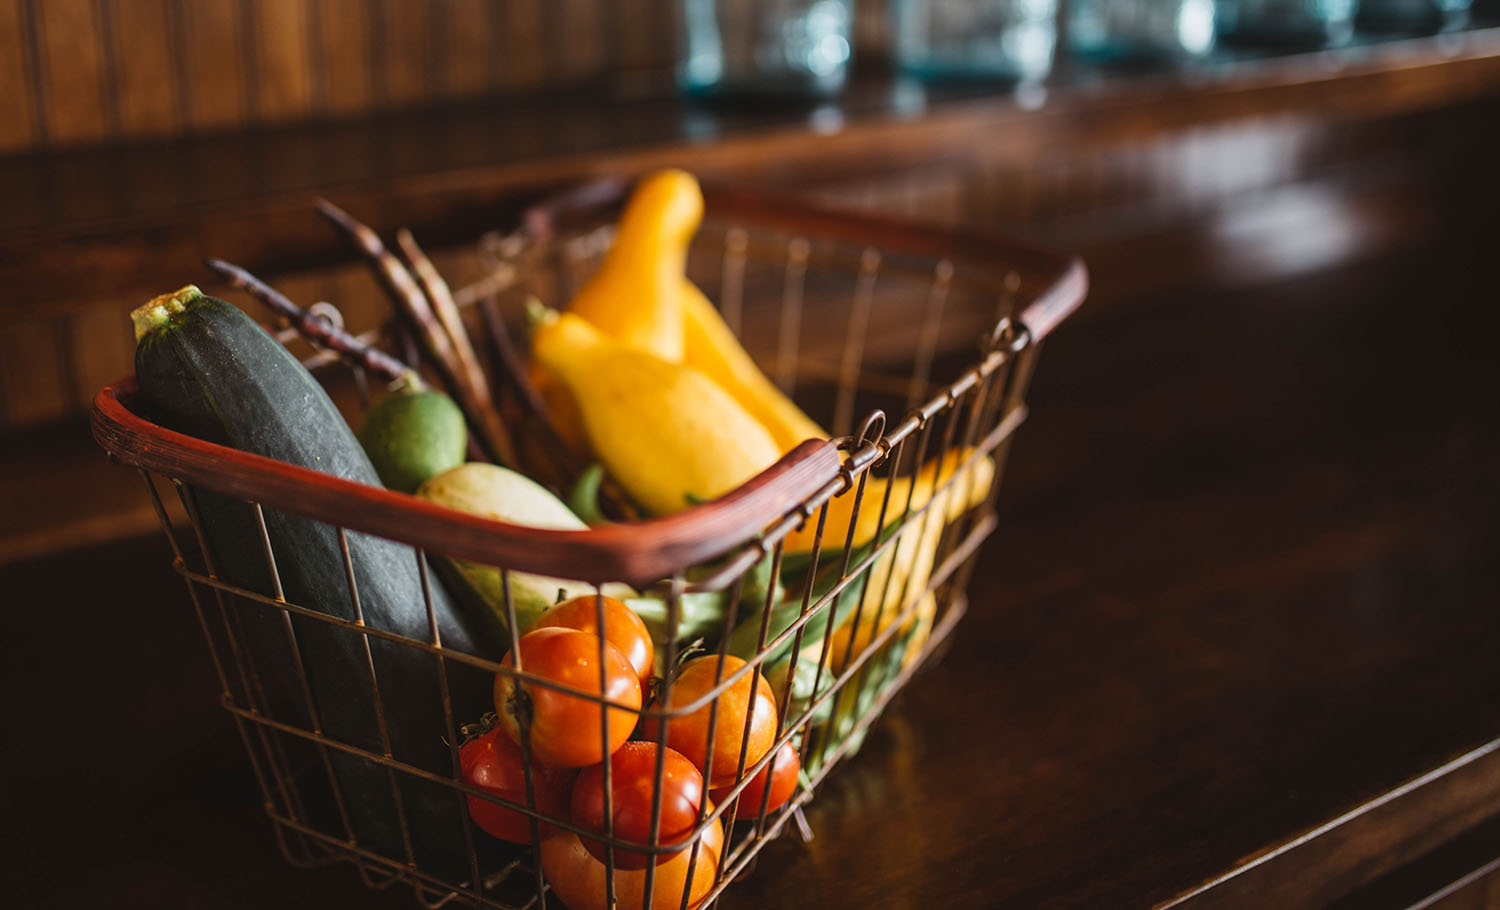 Dr. Urvashi Rangan discusses the challenges that consumers face when trying to make sustainable food choices, the power that their food choices hold in shaping our food system, and how FoodPrints can help.